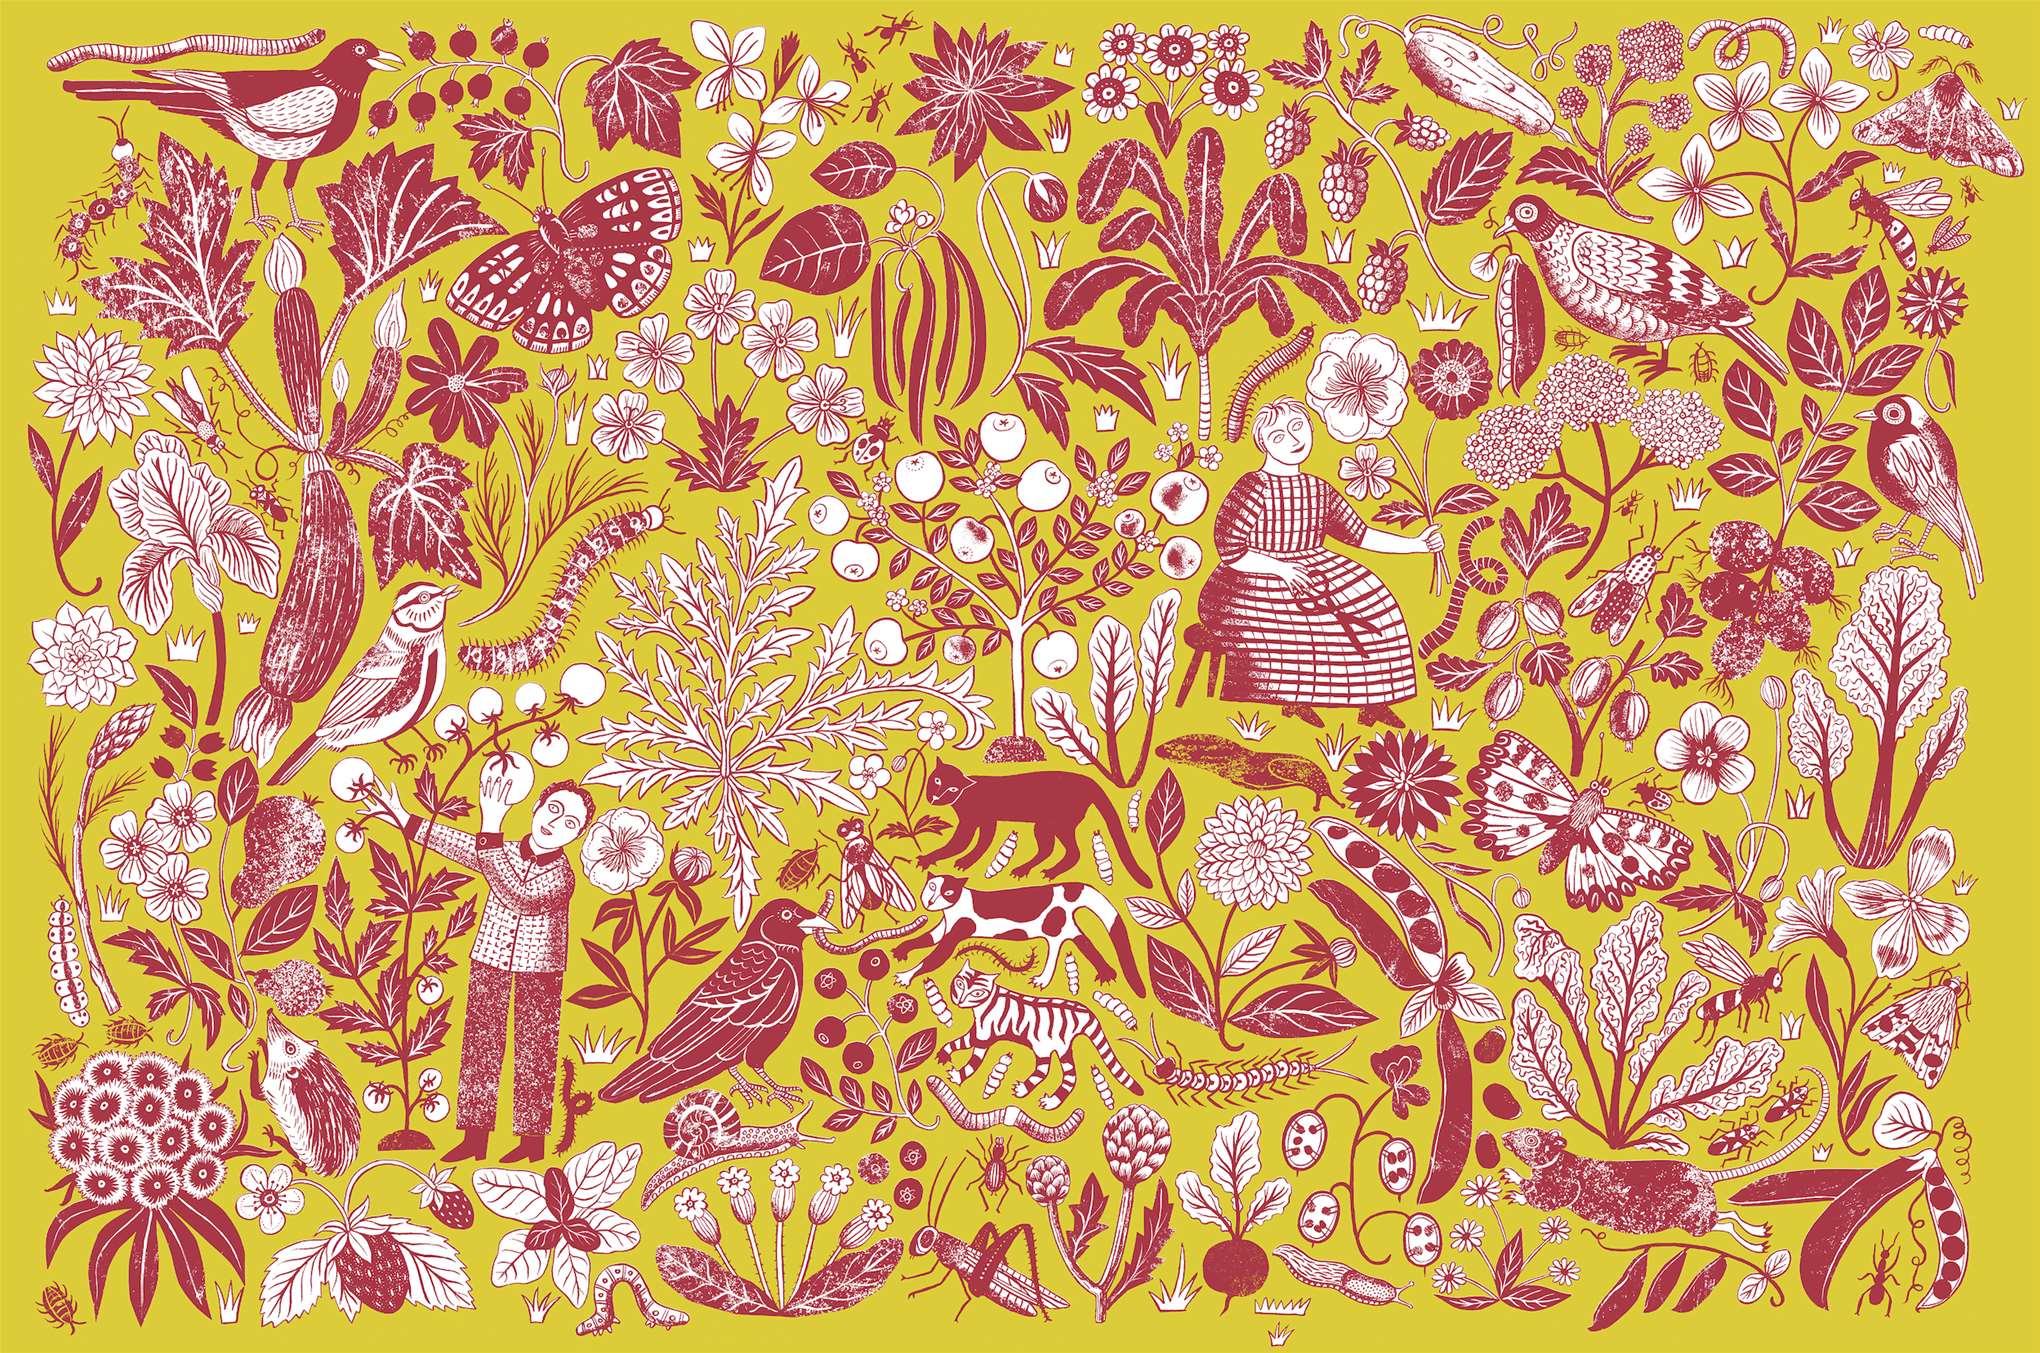 Alice Pattullo, Decorative wallpaper illustration inspired by nature, nostalgia, flora and fauna and childhood memories. 
